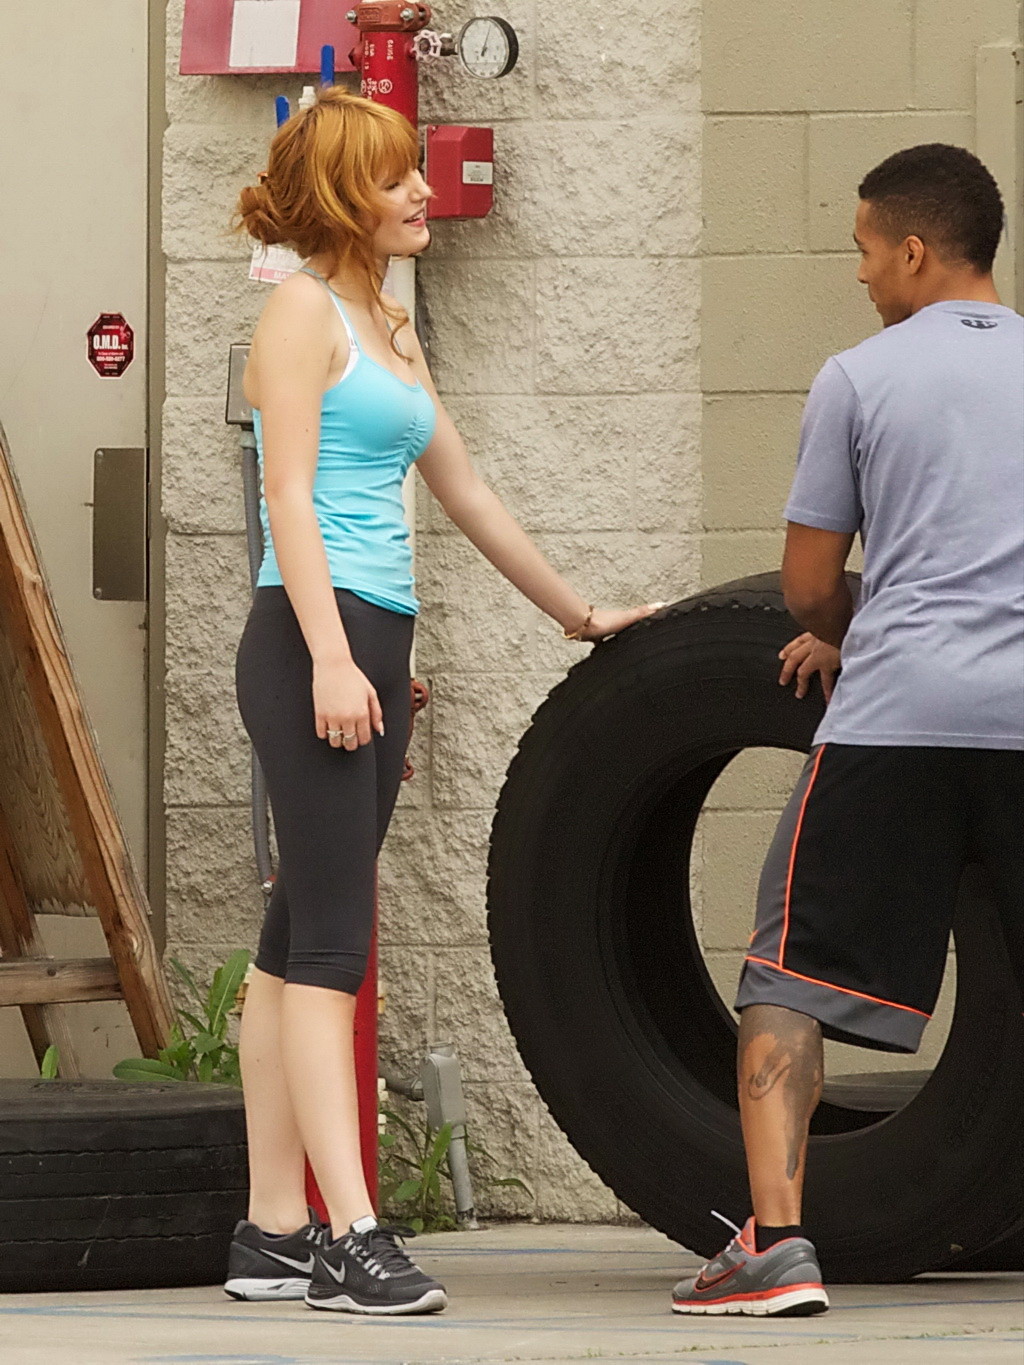 Bella Thorne wearing tiny blue top and leggings on the way at gym in Los Angeles #75239771